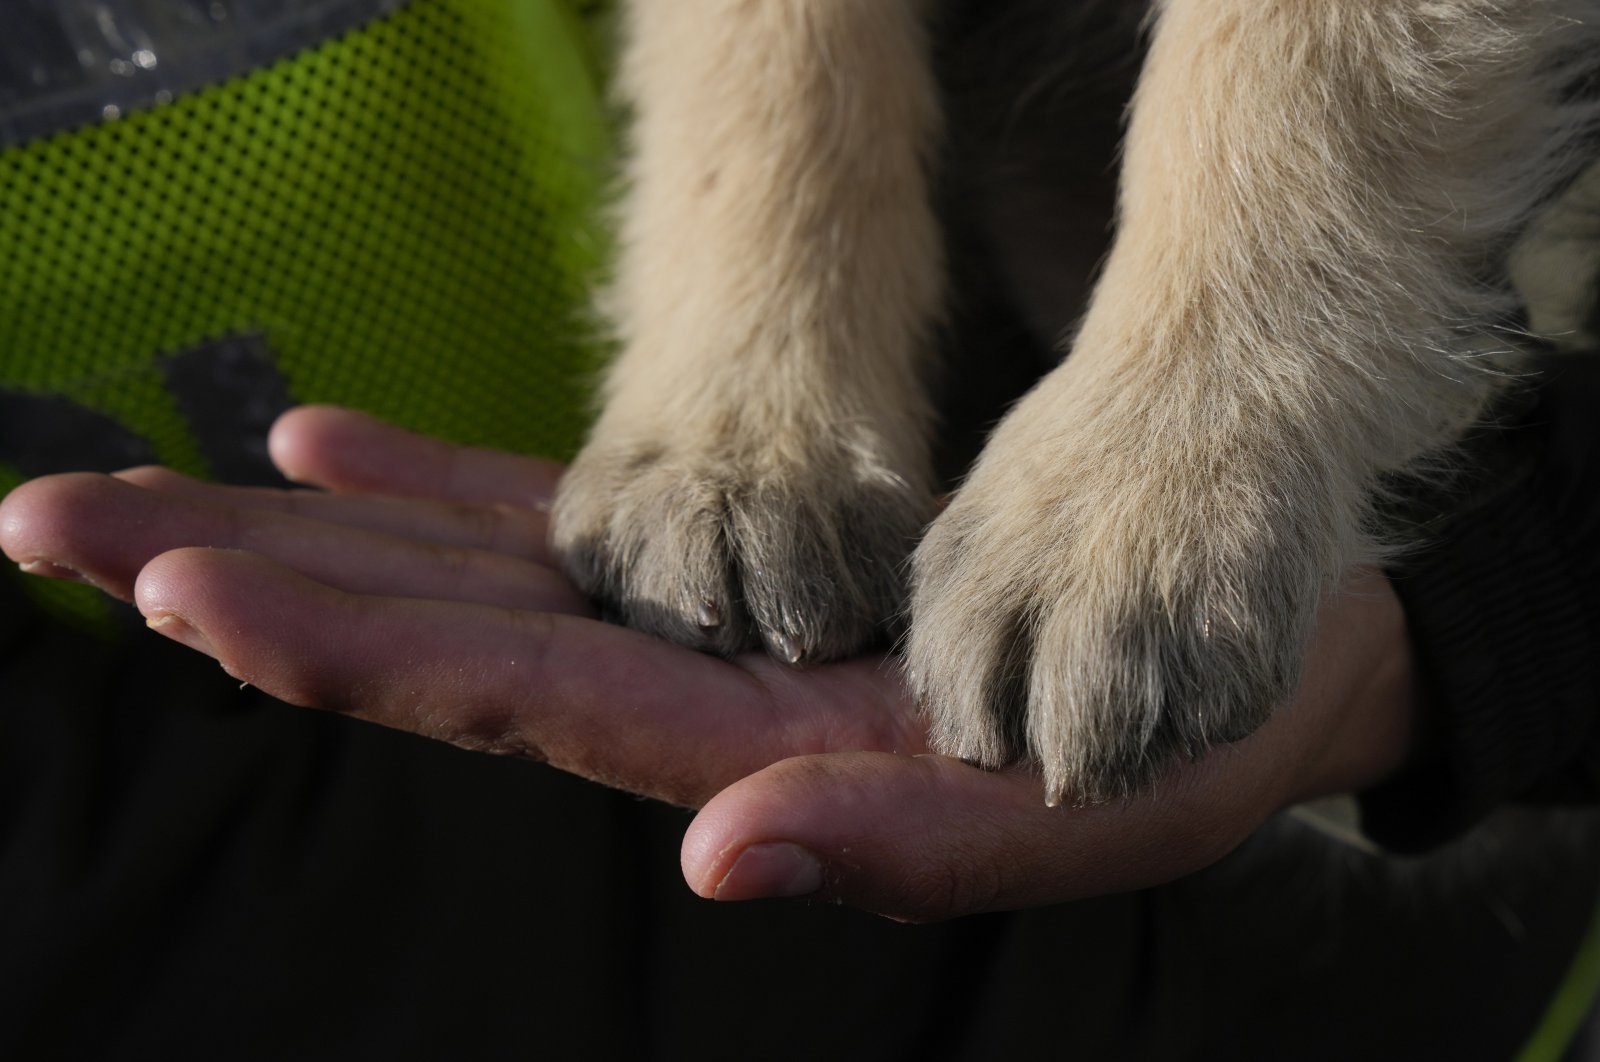 A police officer holds the paws of a dog in her palm during a march demanding no violence against animals, in La Paz, Bolivia, April 1, 2022. (AP Photo)